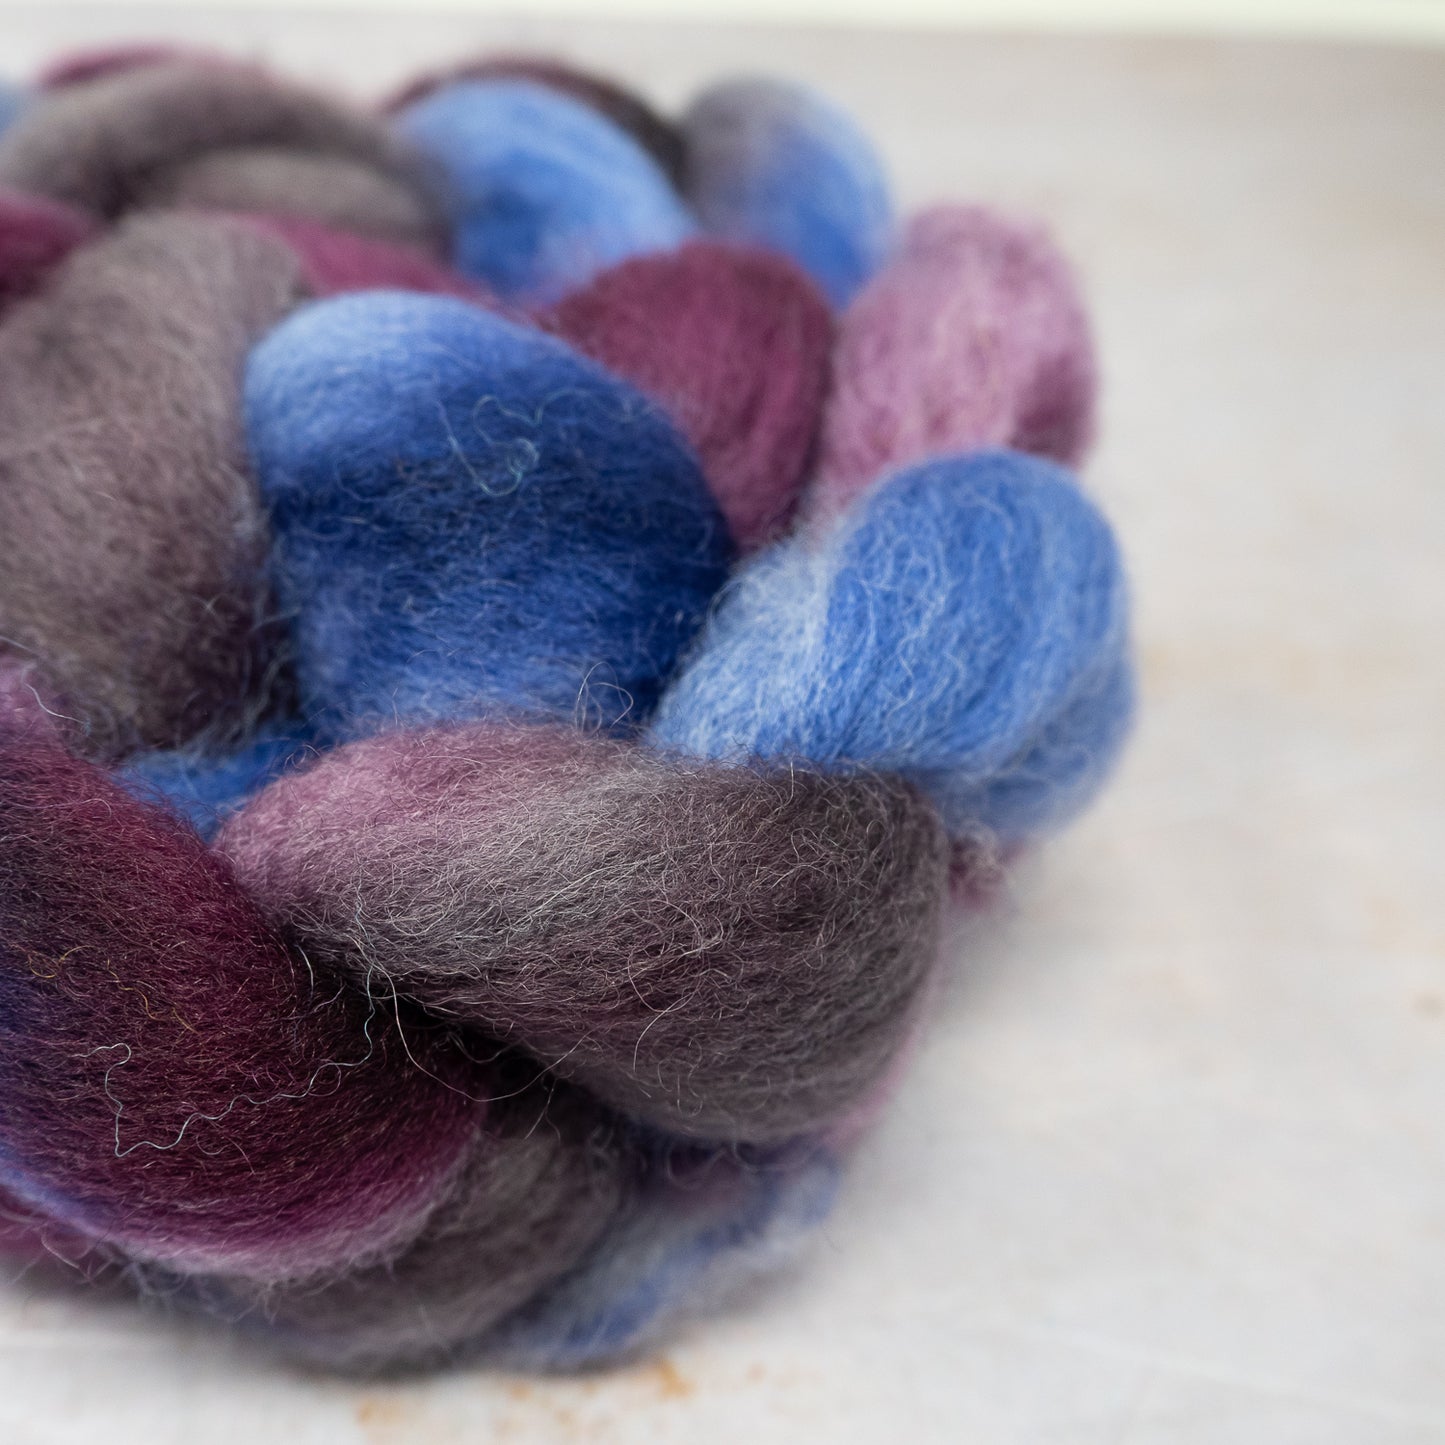 whitefaced woodland combed top in dark blue and purple